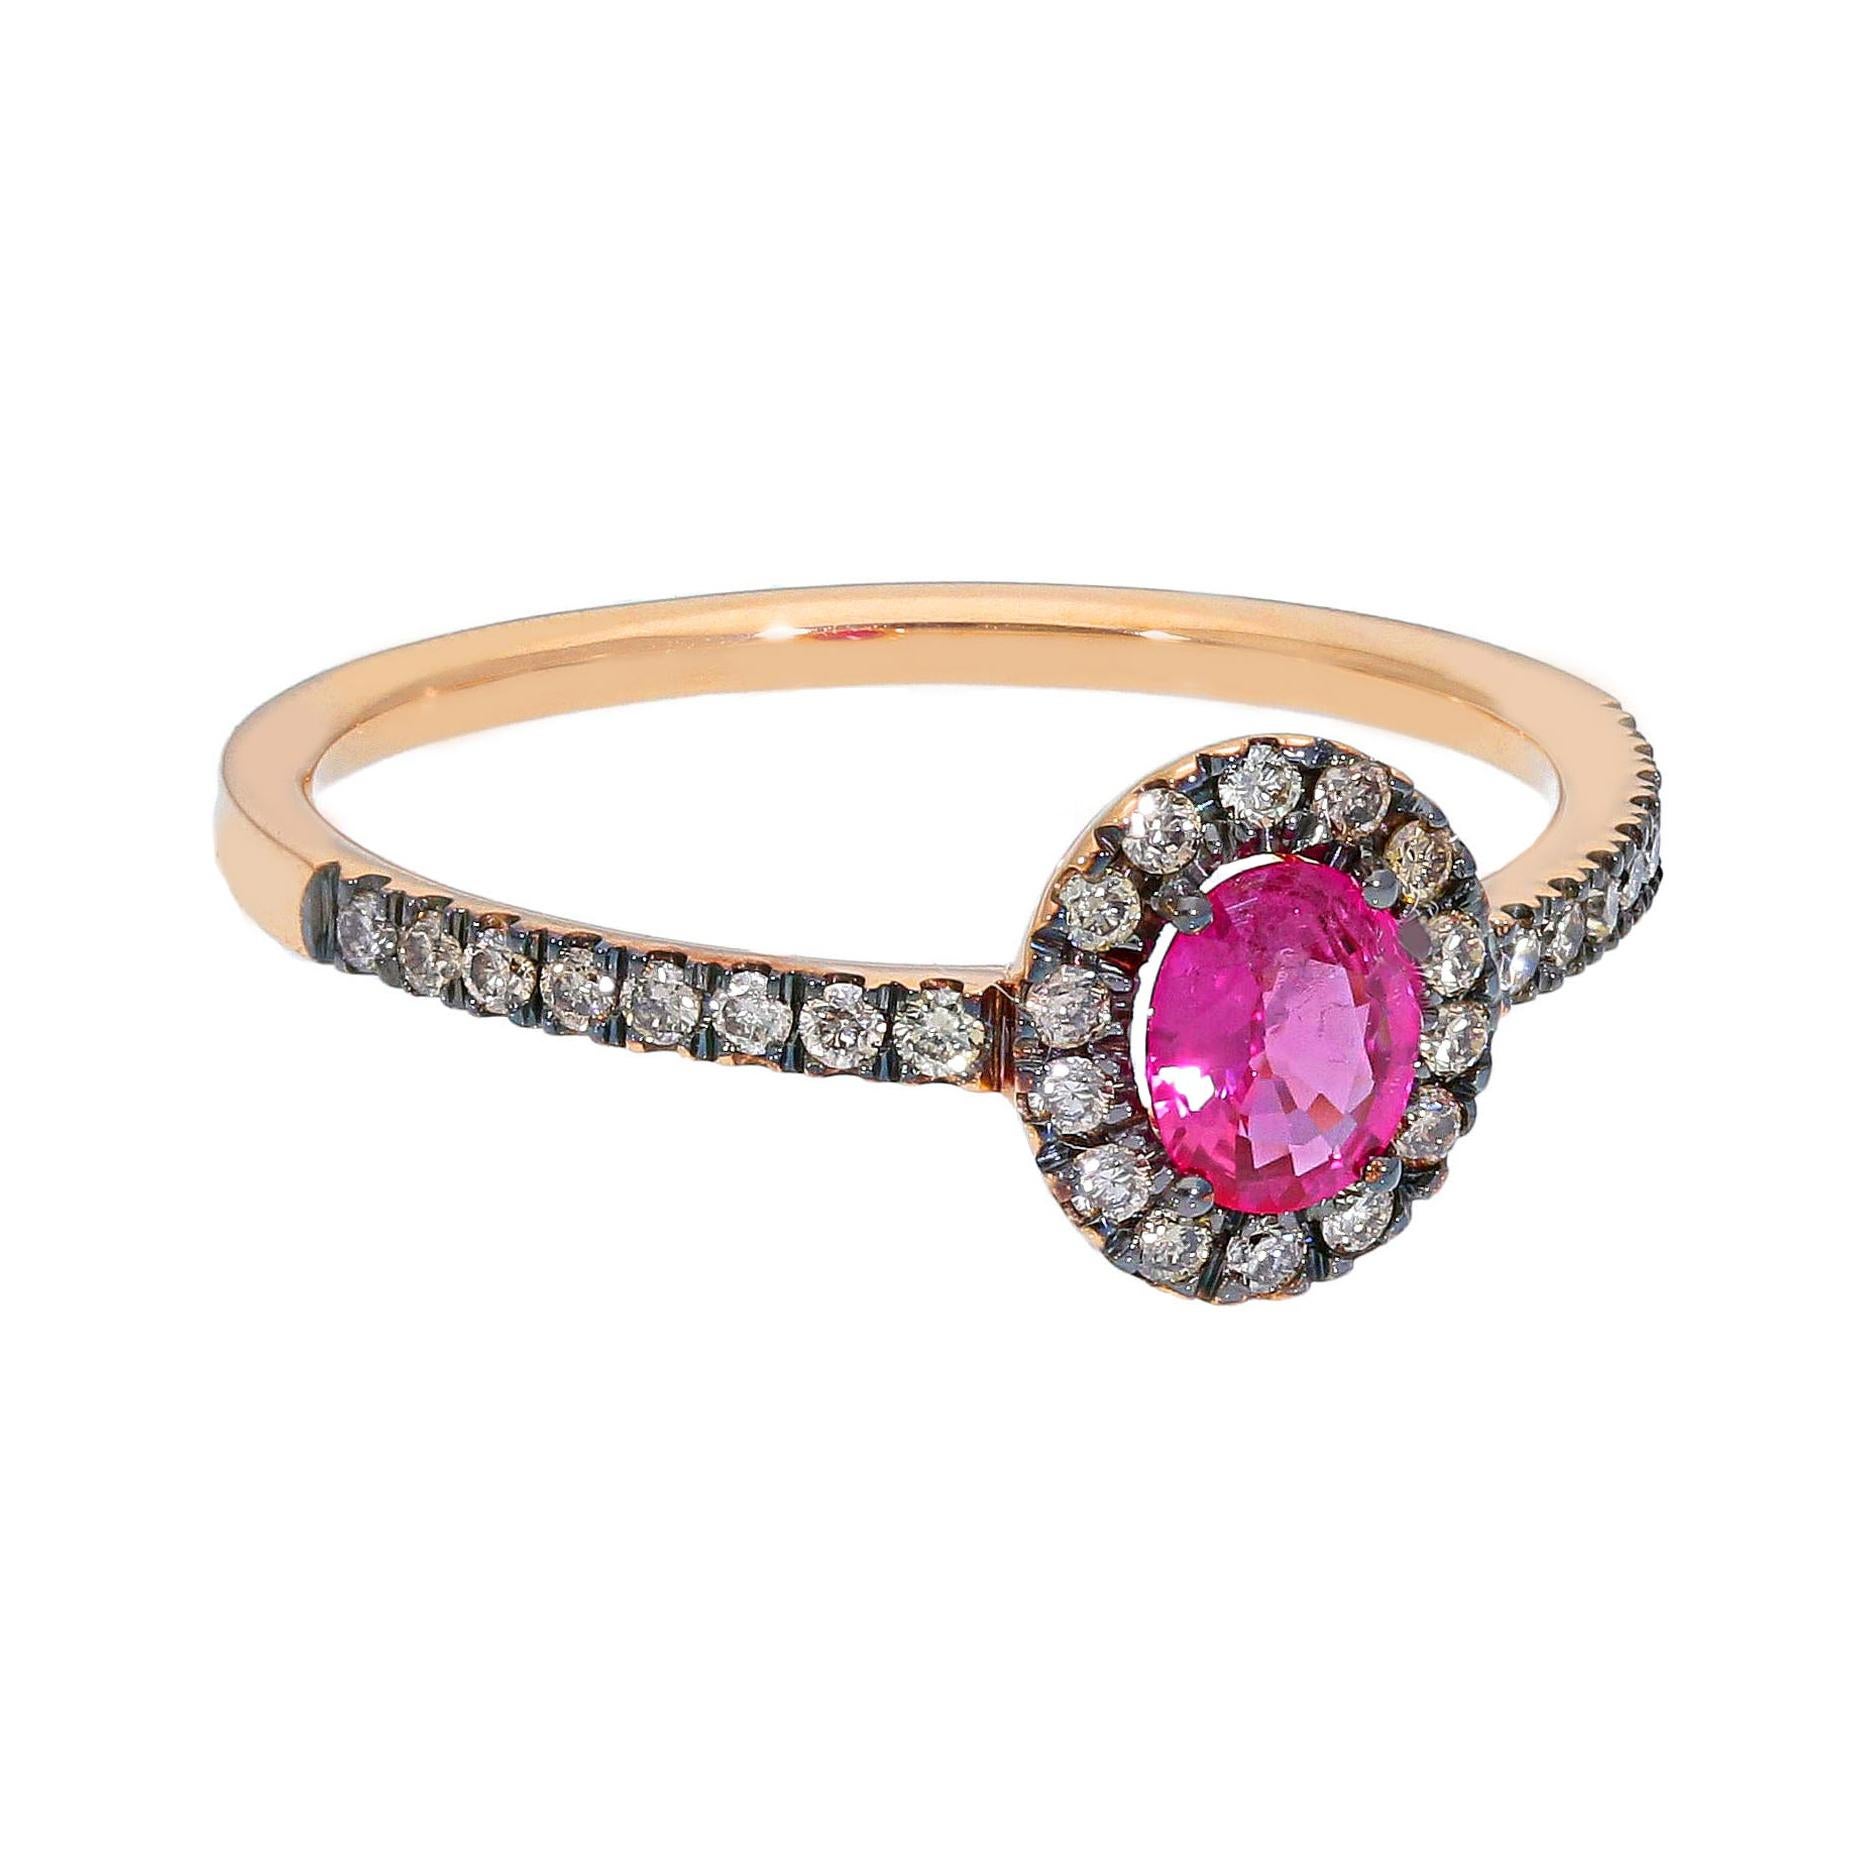 For Sale:  18k Black and Rose Golg Wedding Ring with Ruby and Brown Diamonds 4